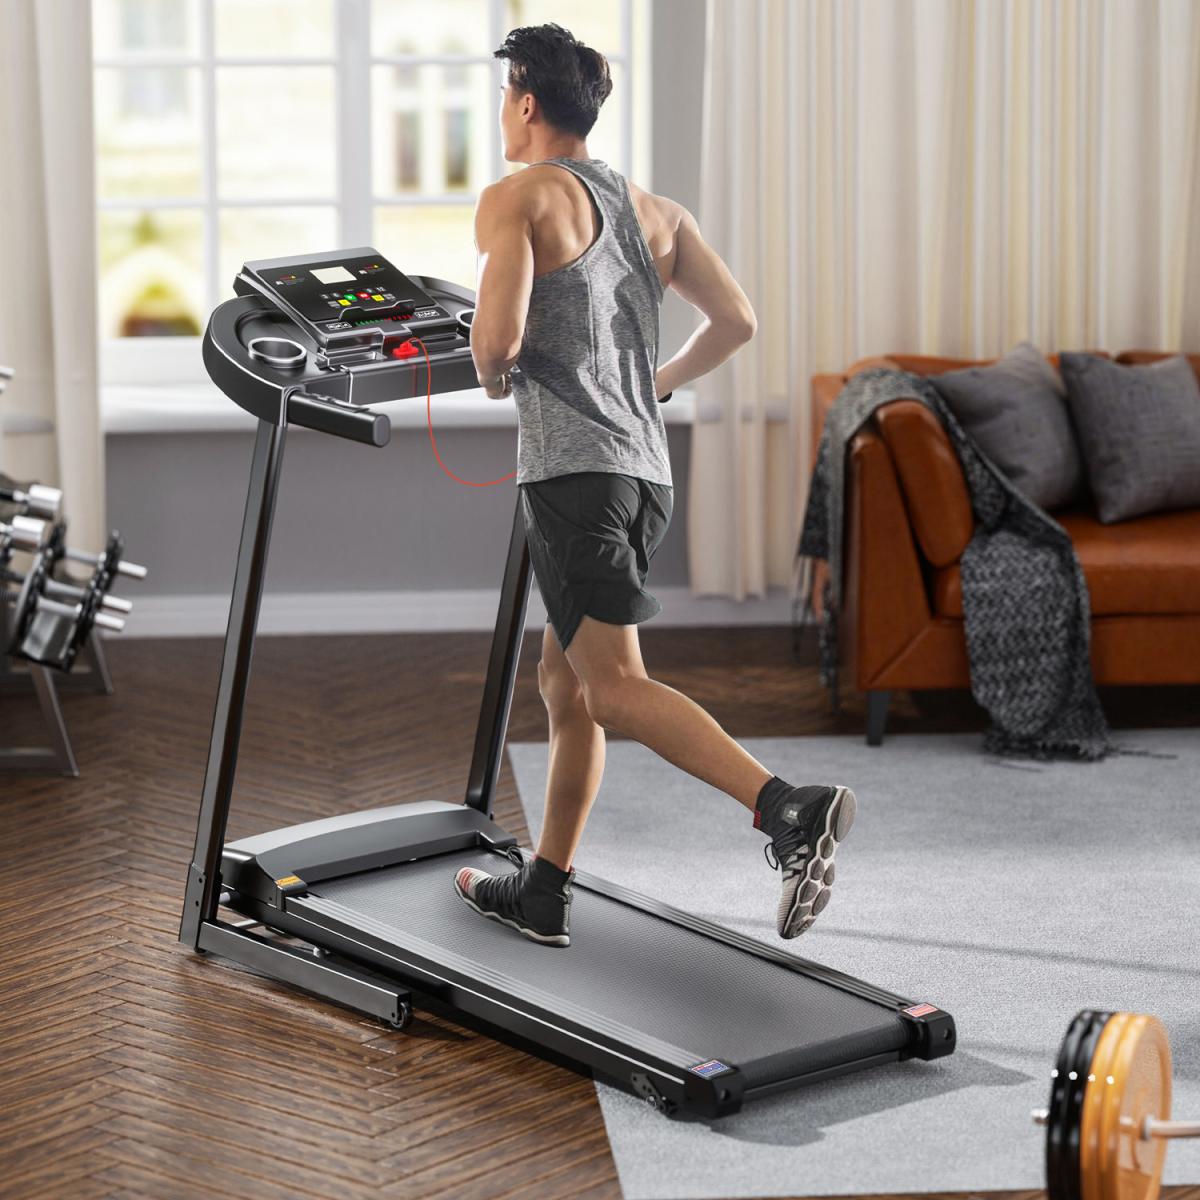 Treadmills - 2.5 Hp hydraulic folding removable treadmill with 3-speed incline adjustment, 12 preset programs, 3 countdown modes, heart rate, bluetooth and more, suitable for home and gym use